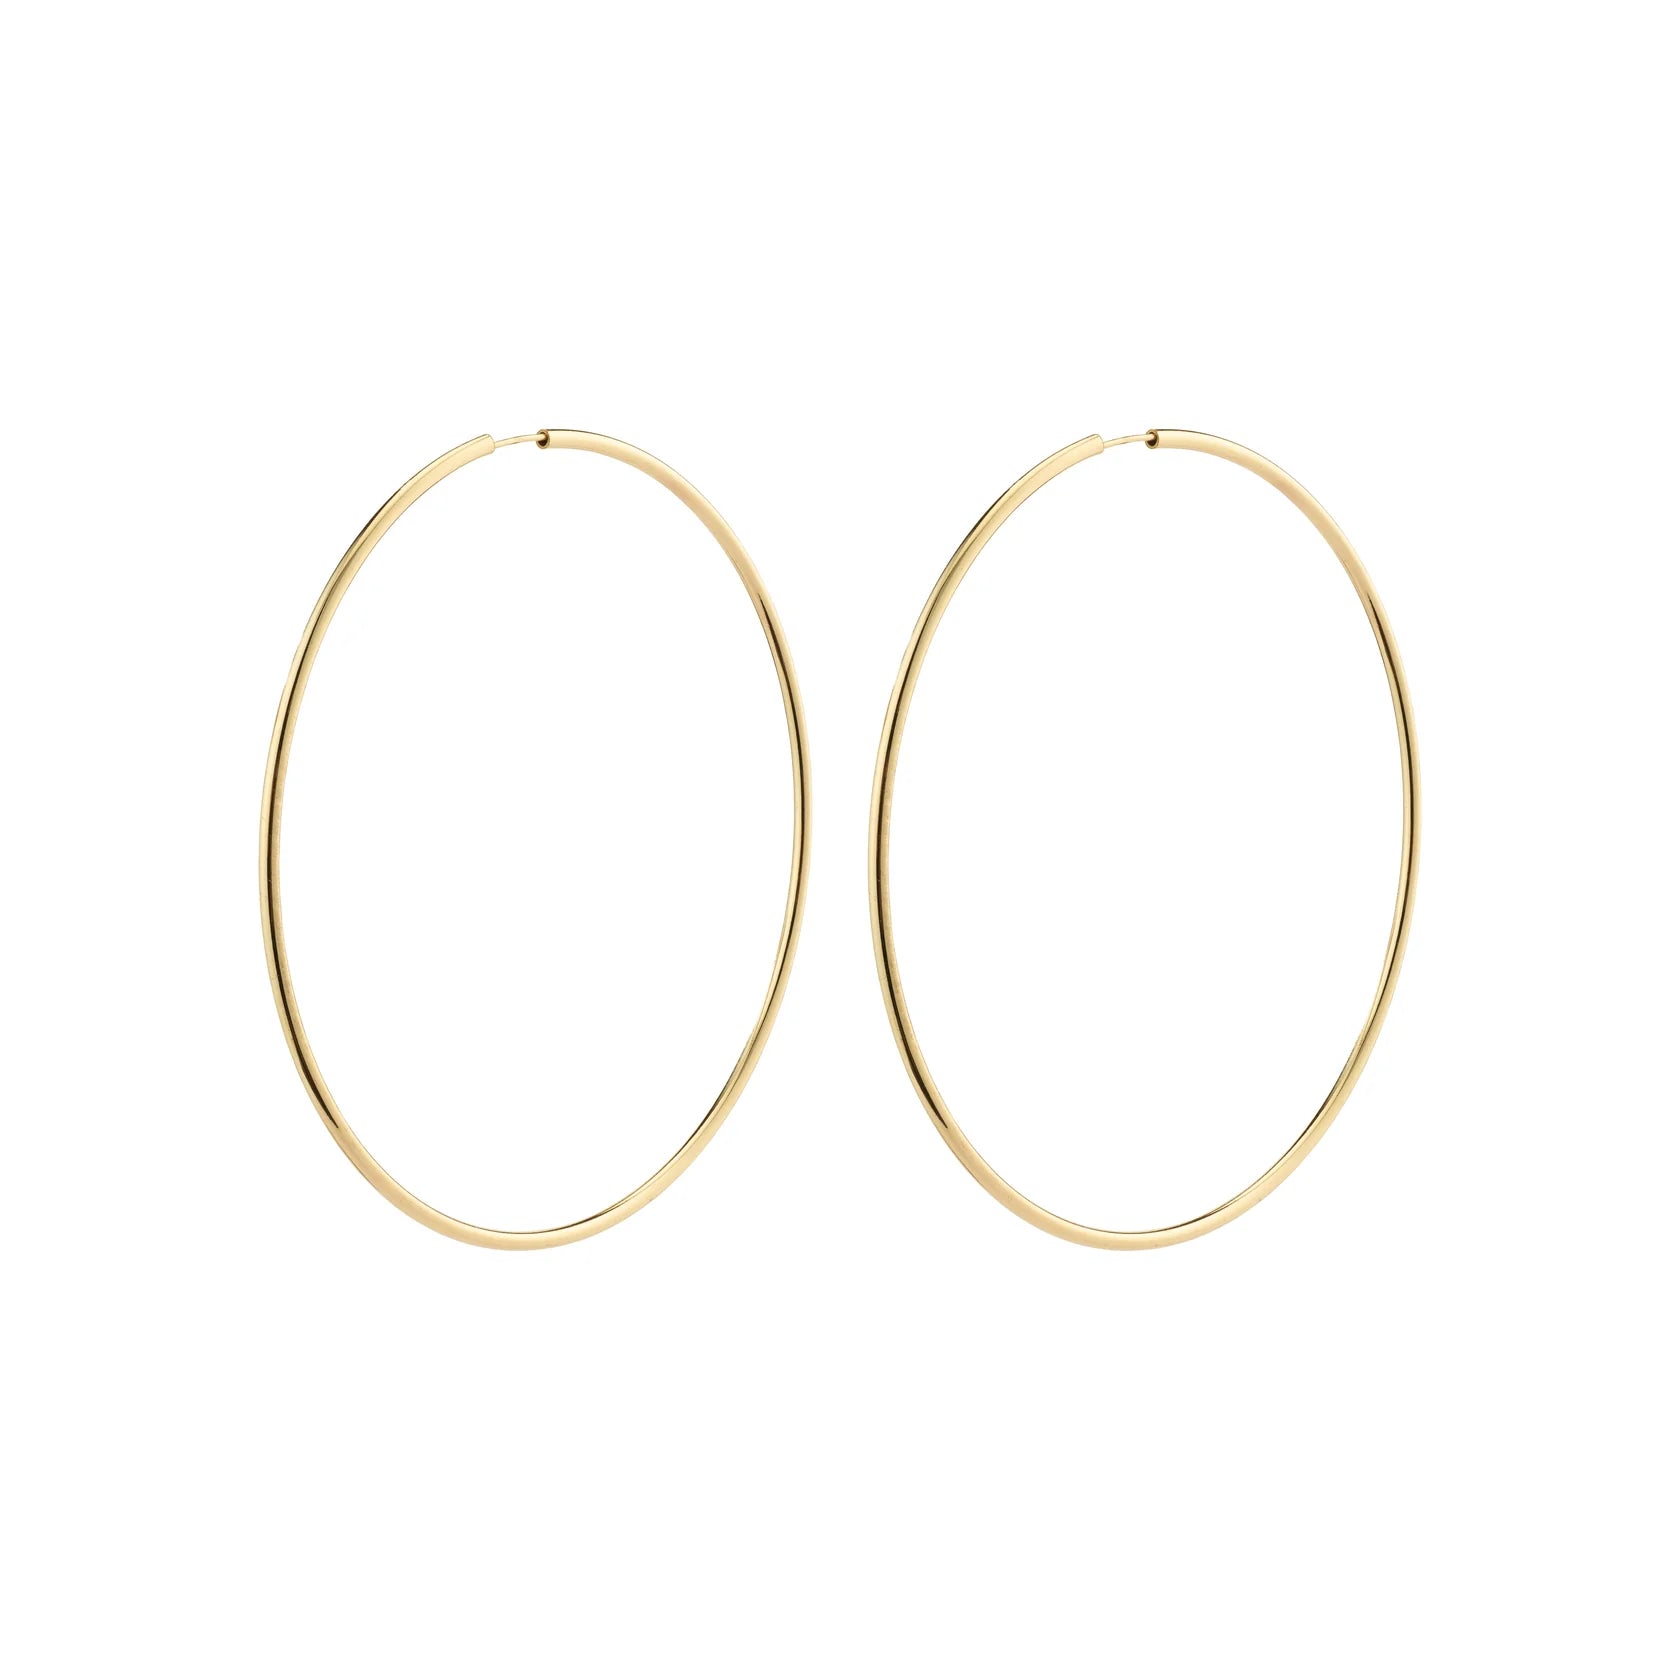 APRIL RECYCLED MAXI HOOP EARRINGS / 80MM / GOLD